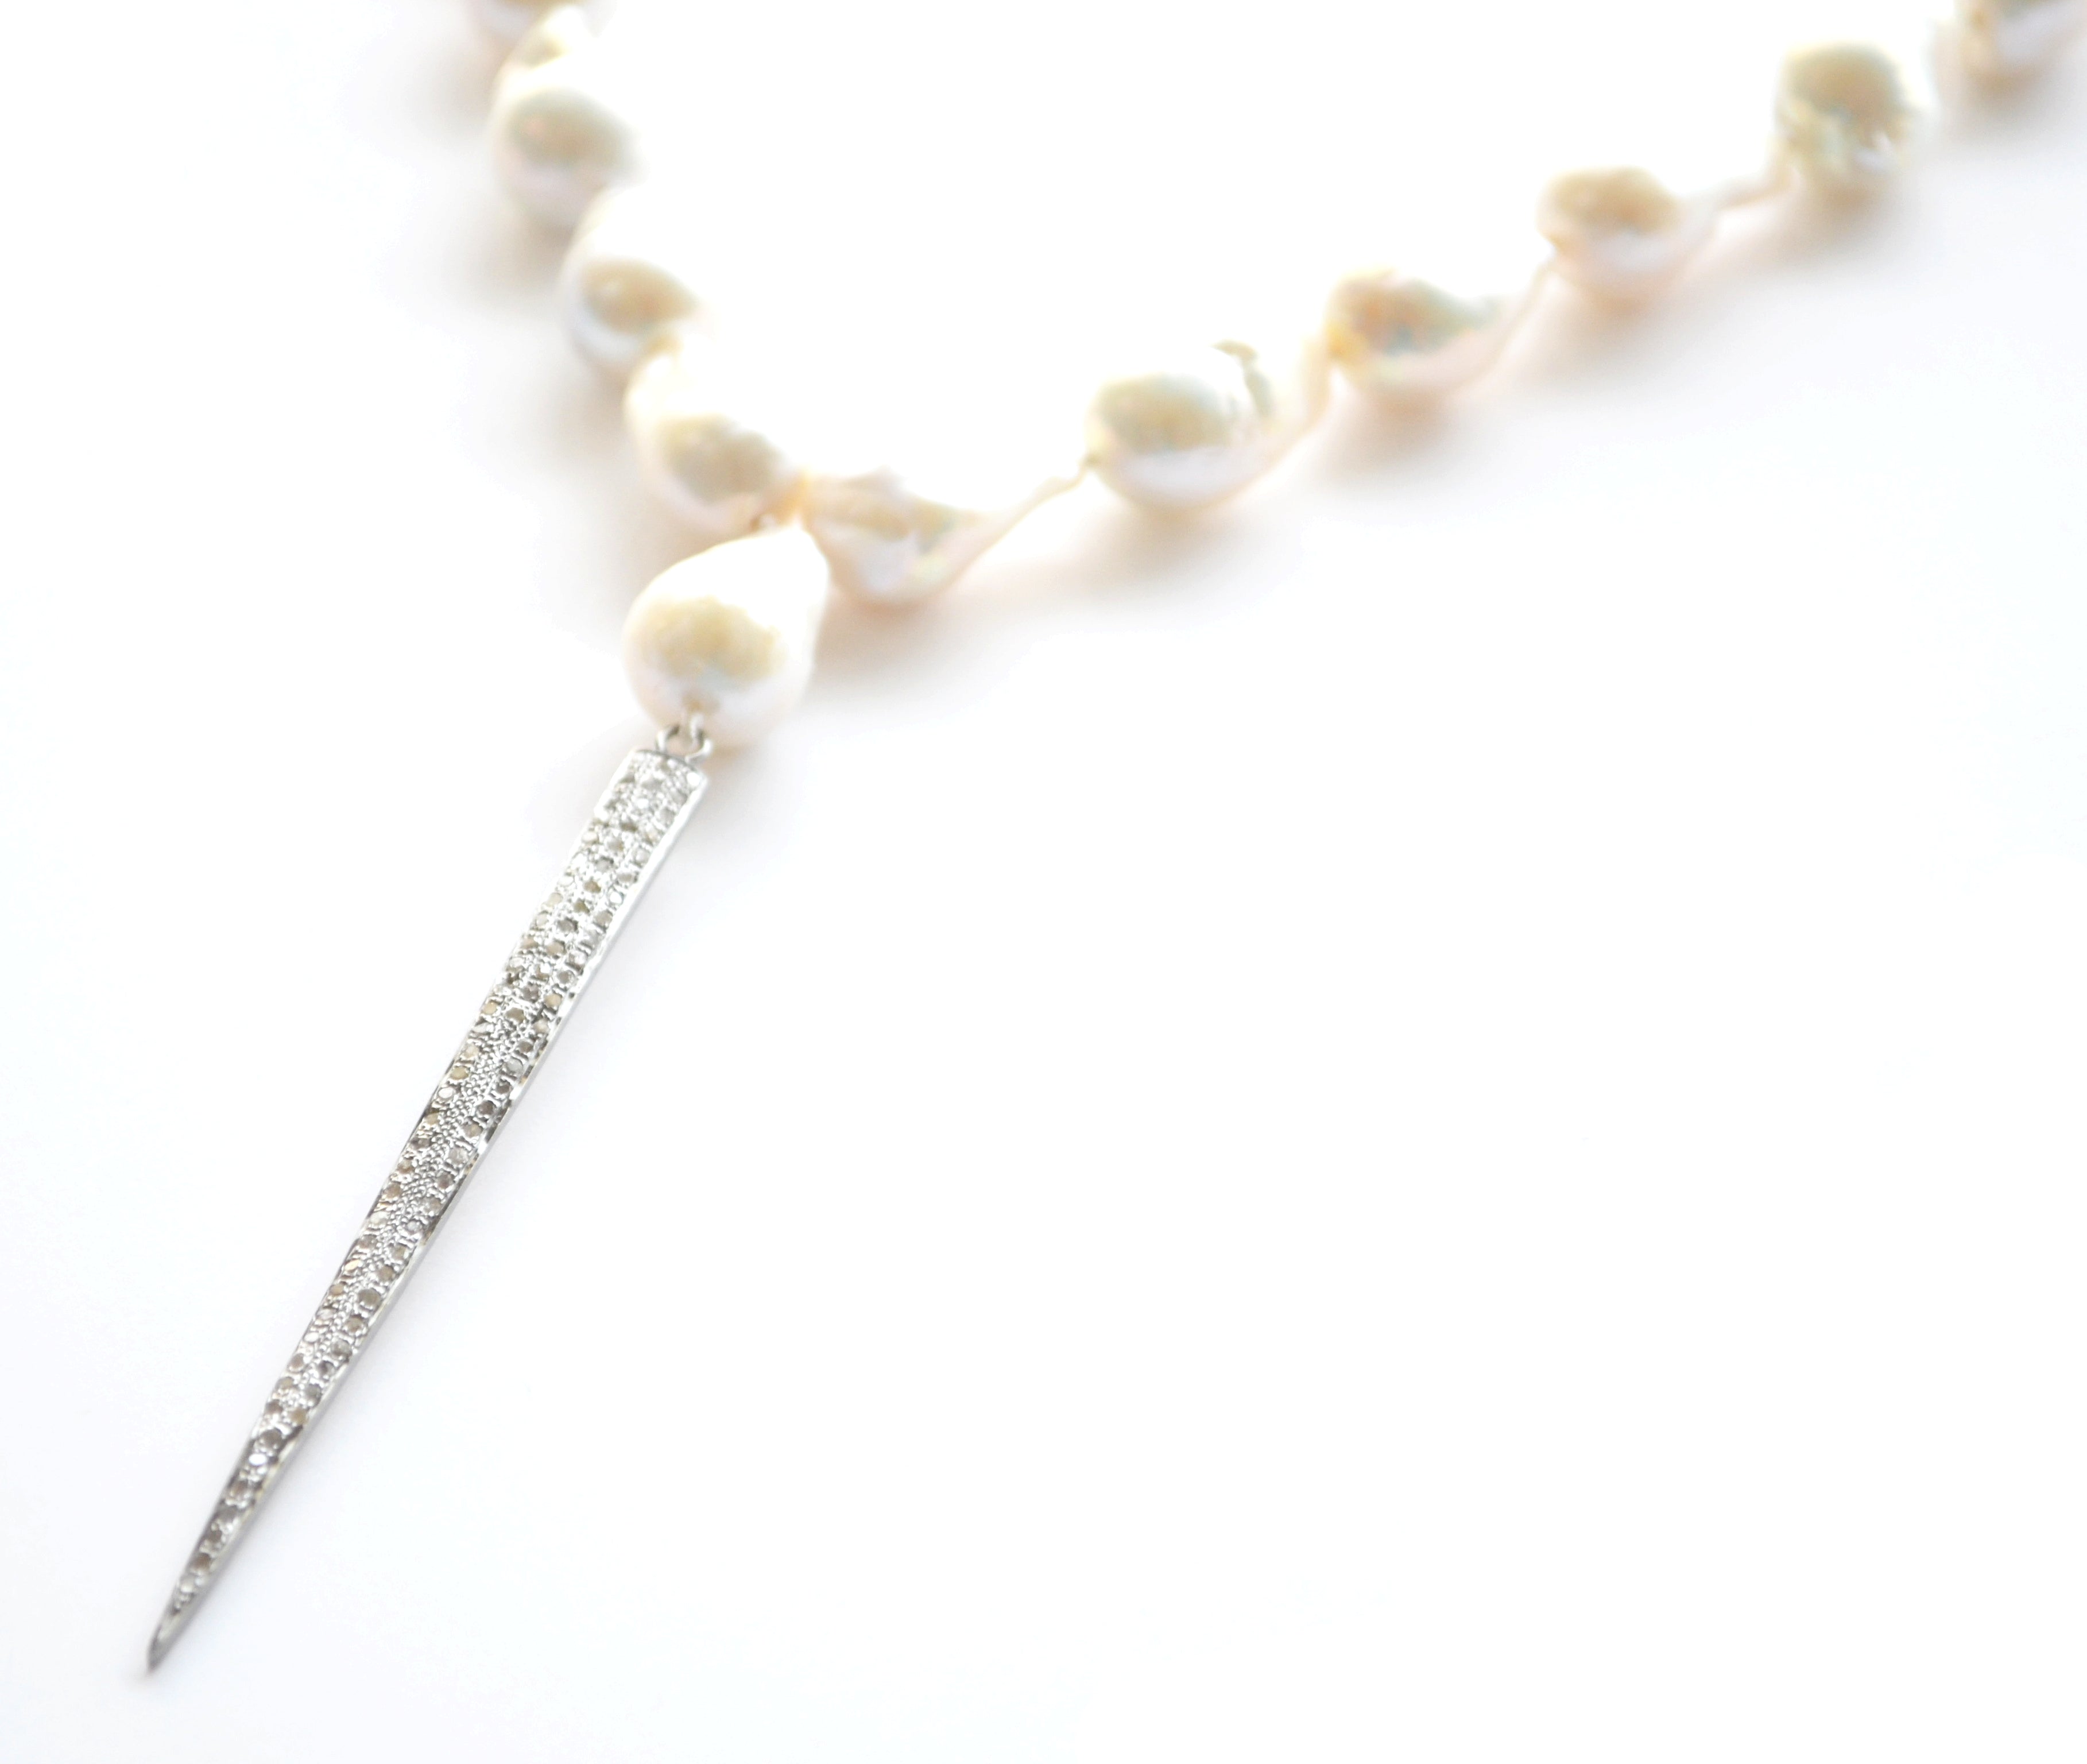 White Baroque Pearl Necklace with a Diamond Spike